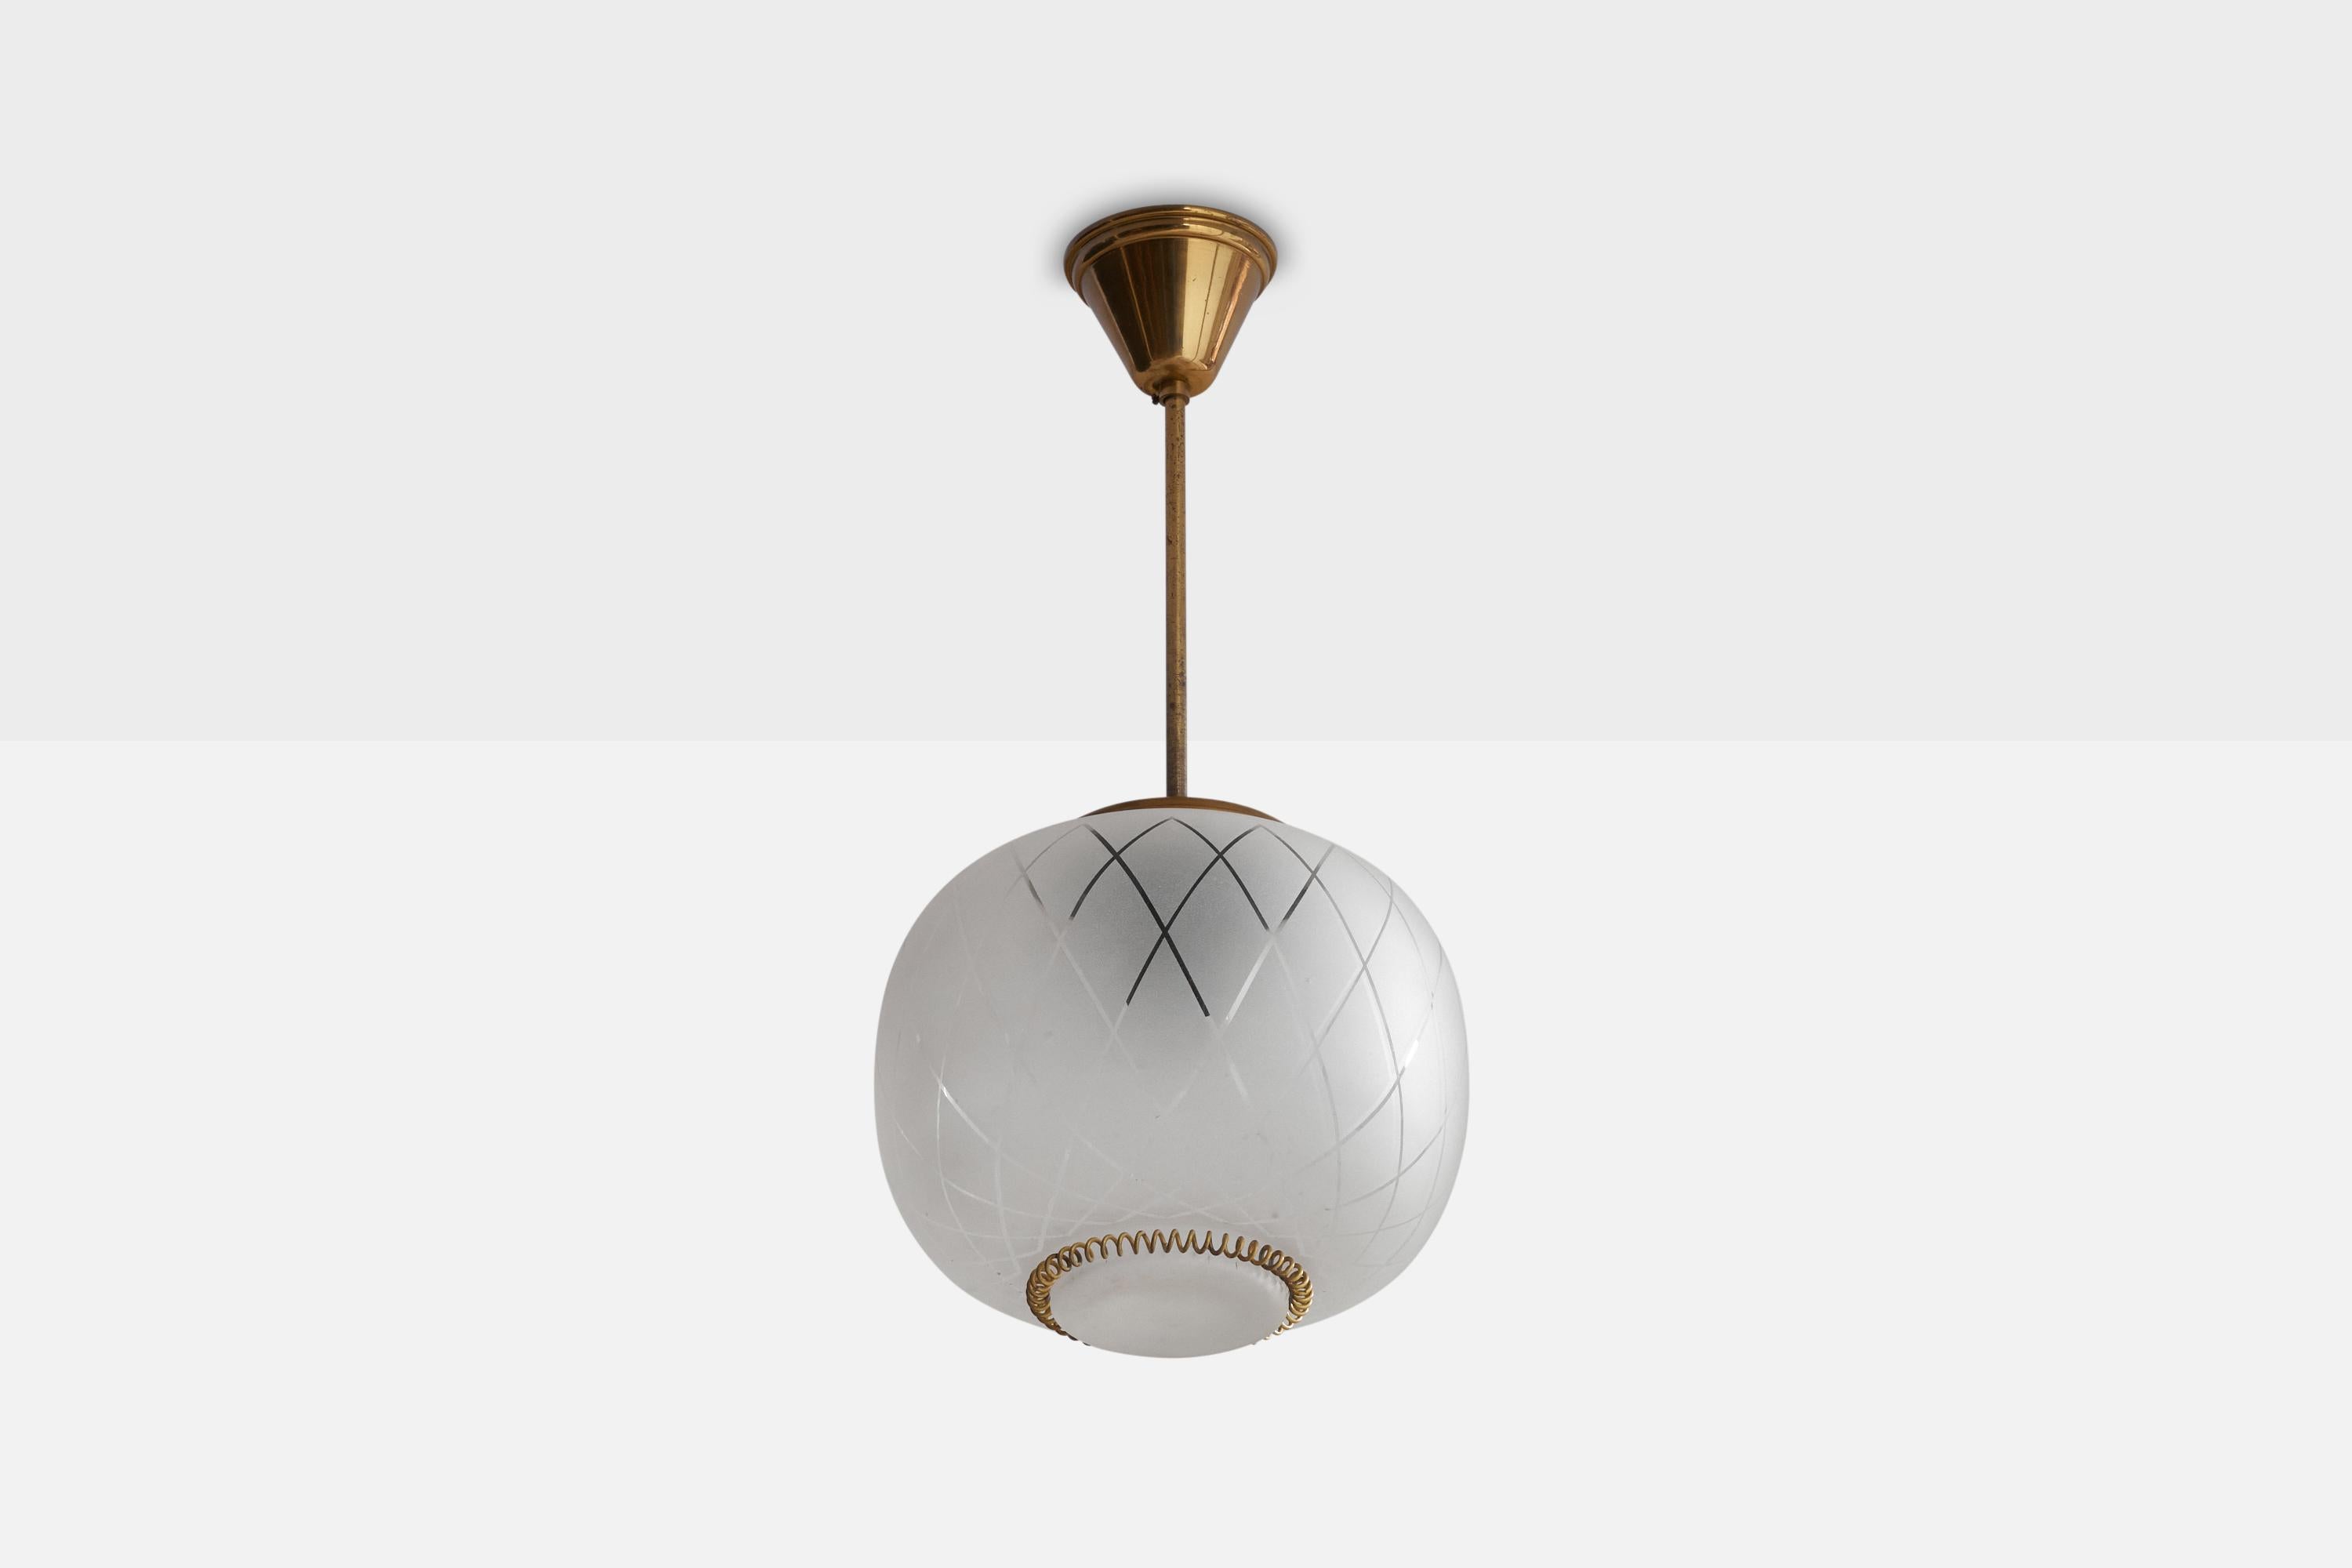 A brass and etched glass pendant light designed and produced by Stockman-Orno, Finland, 1940s.

Dimensions of canopy (inches): 3” H x 3.8” Diameter
Socket takes standard E-26 bulbs. 1 socket.There is no maximum wattage stated on the fixture. All